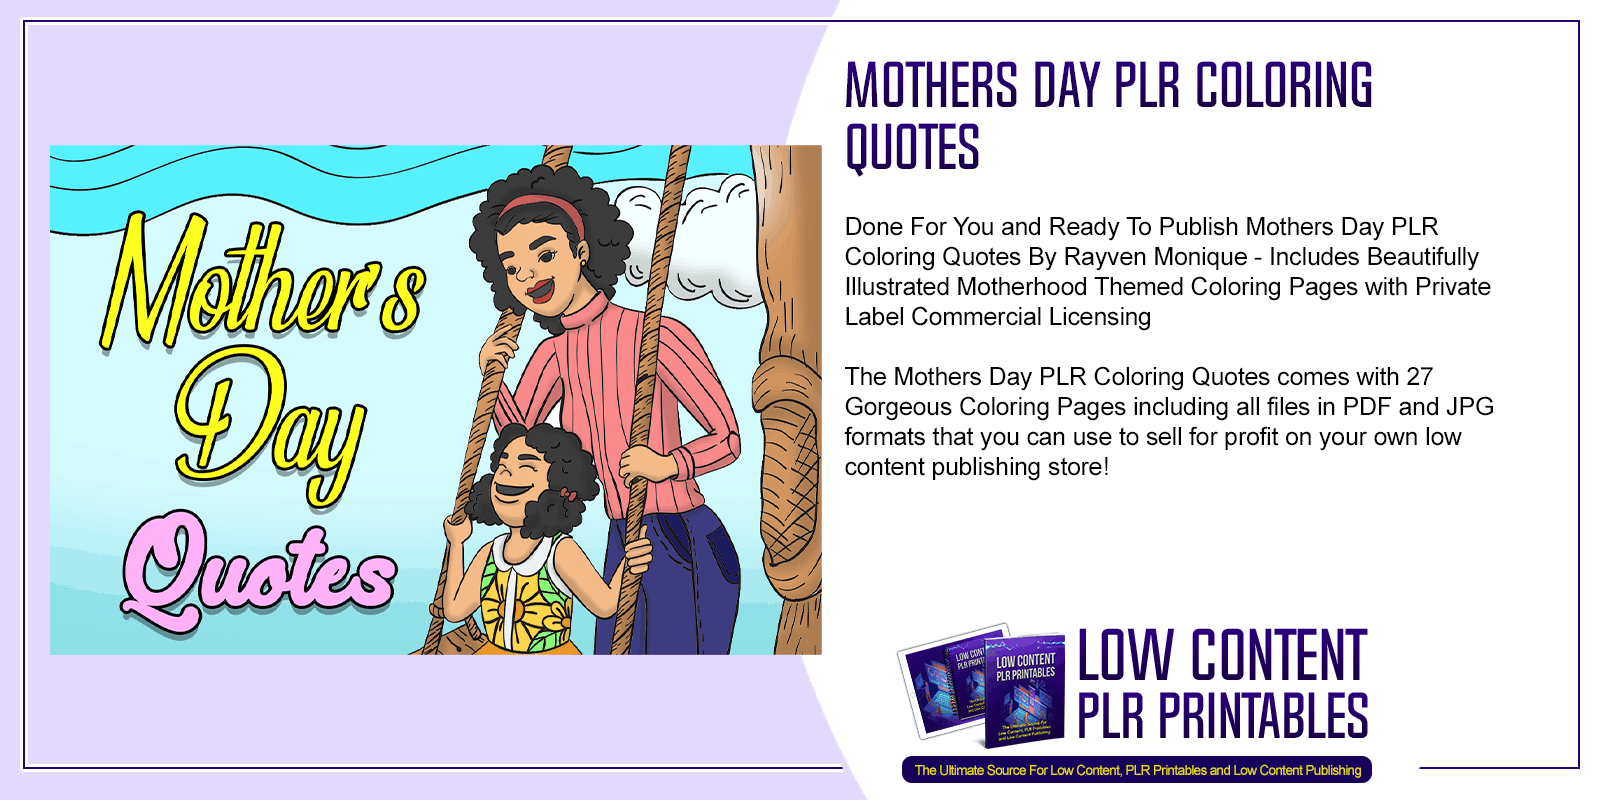 Mothers Day PLR Coloring Quotes